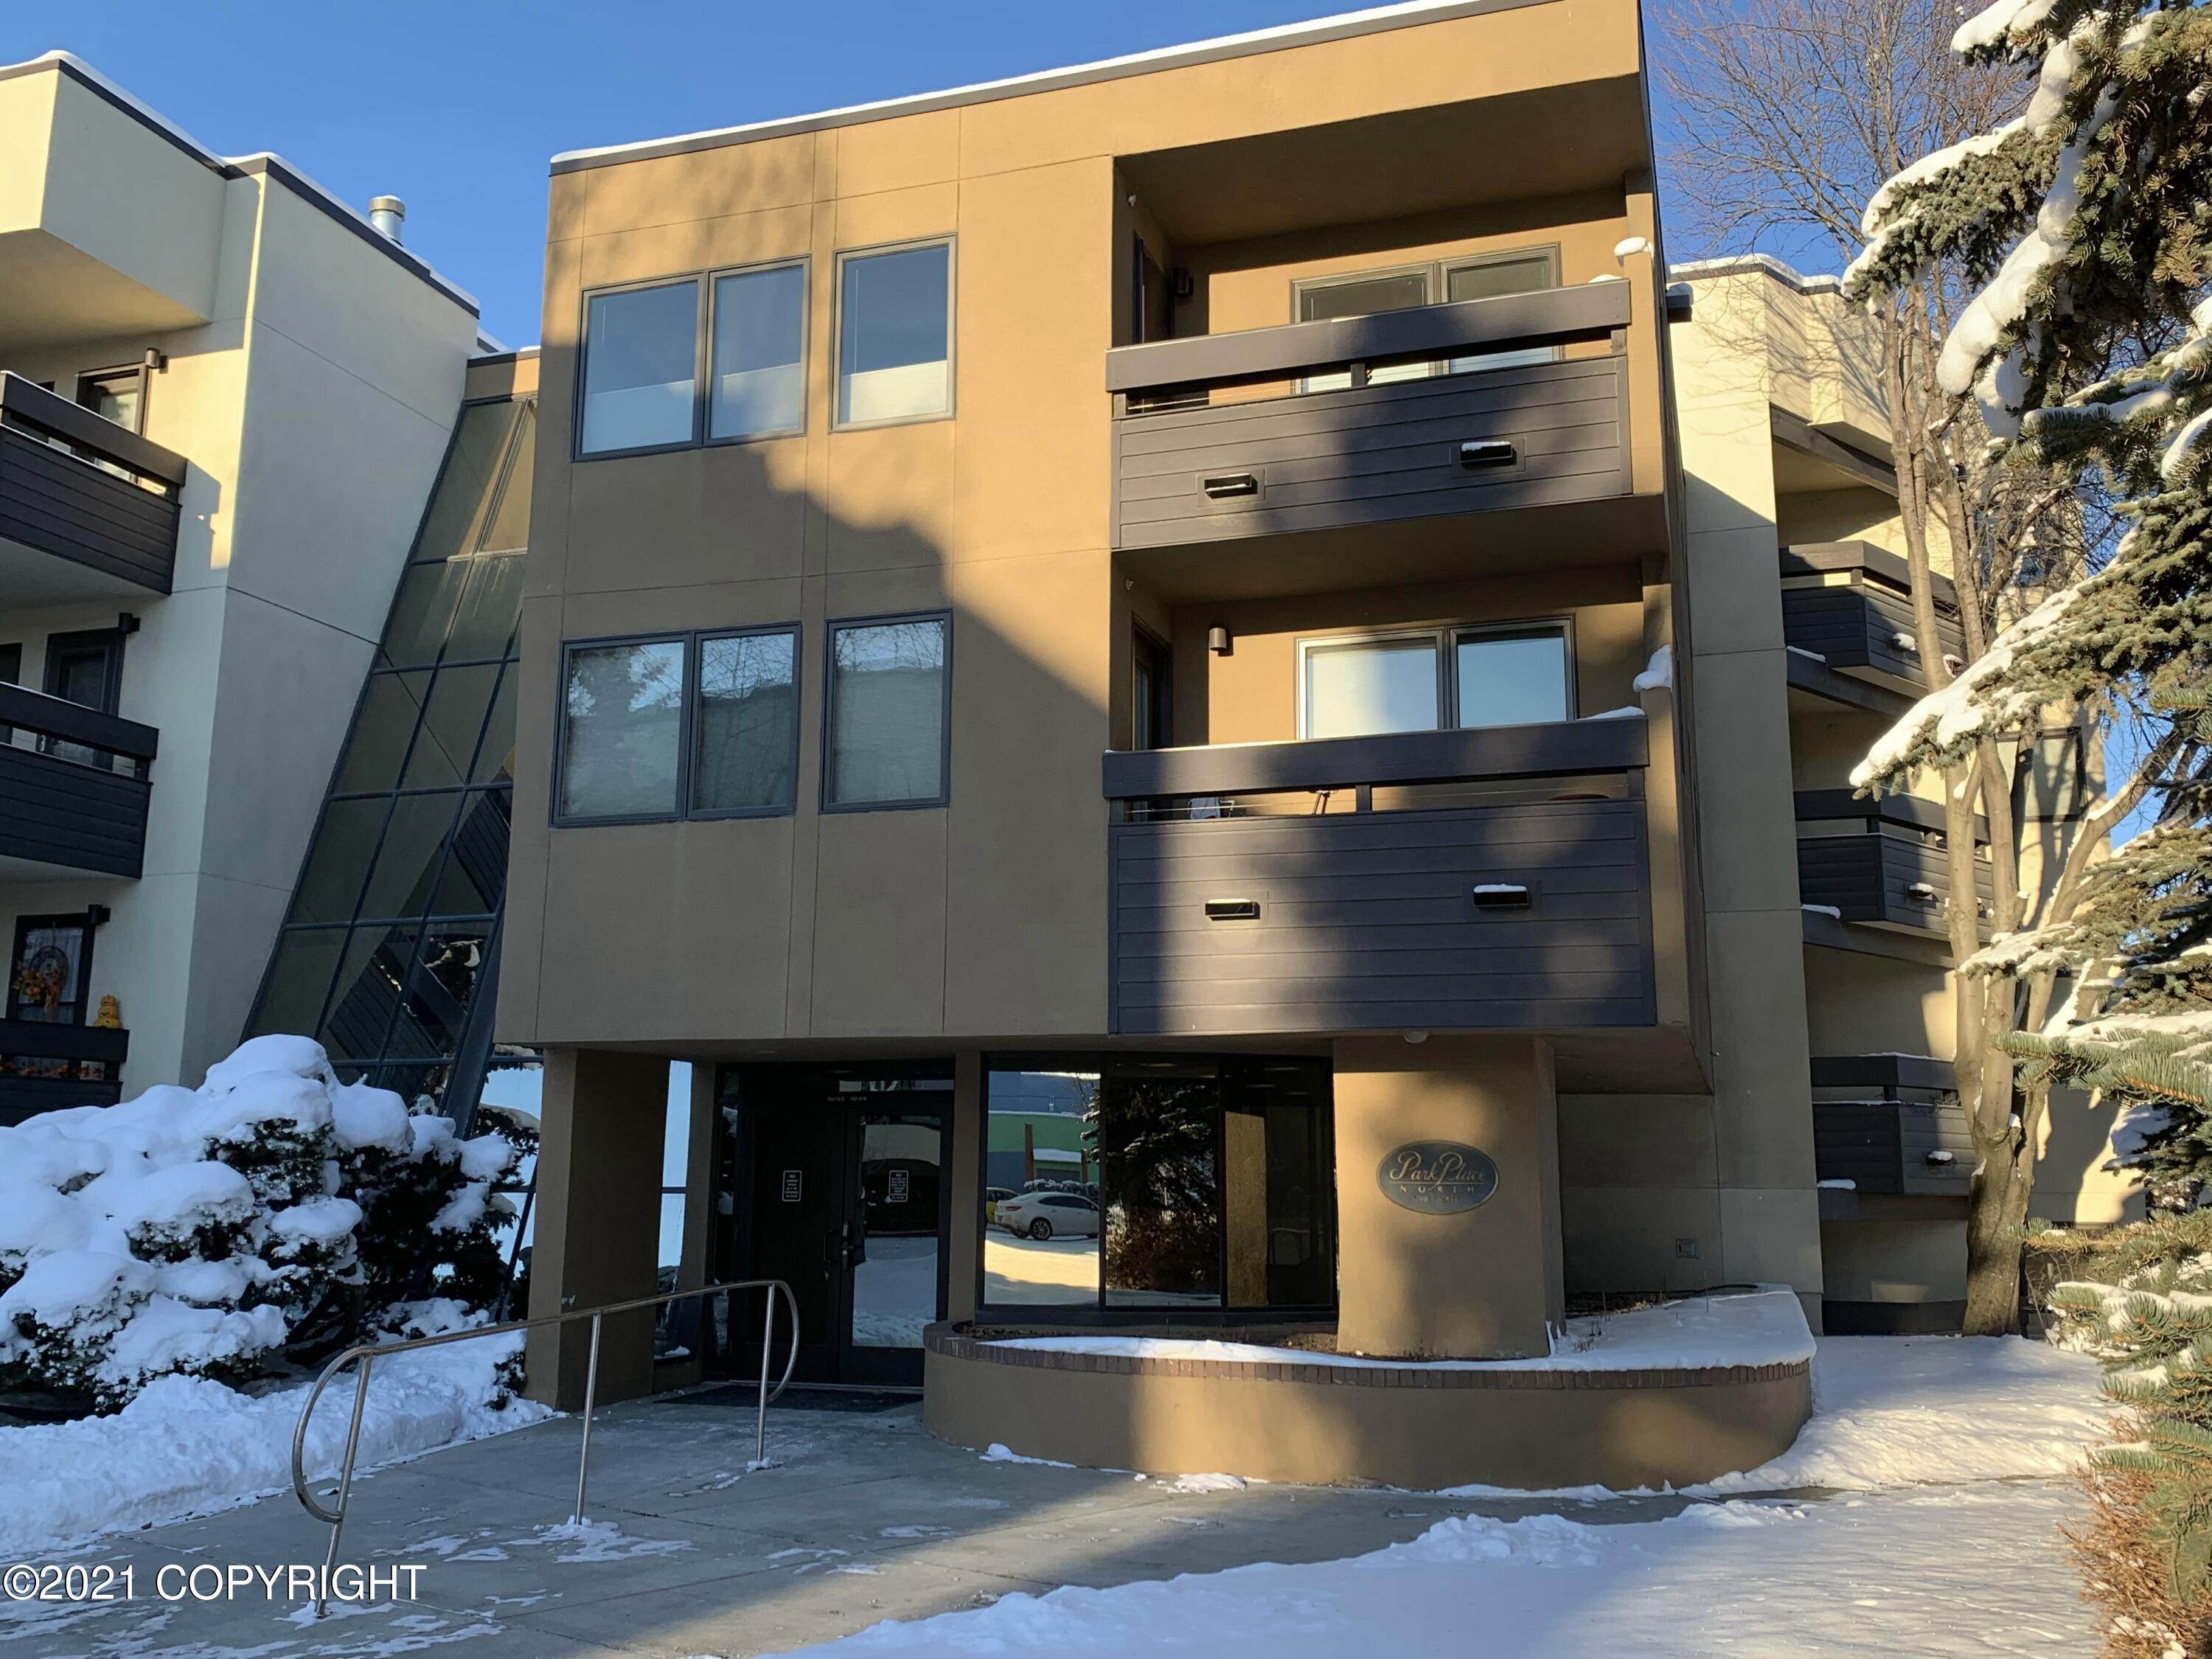 43. Condominiums for Sale at Anchorage, Alaska United States